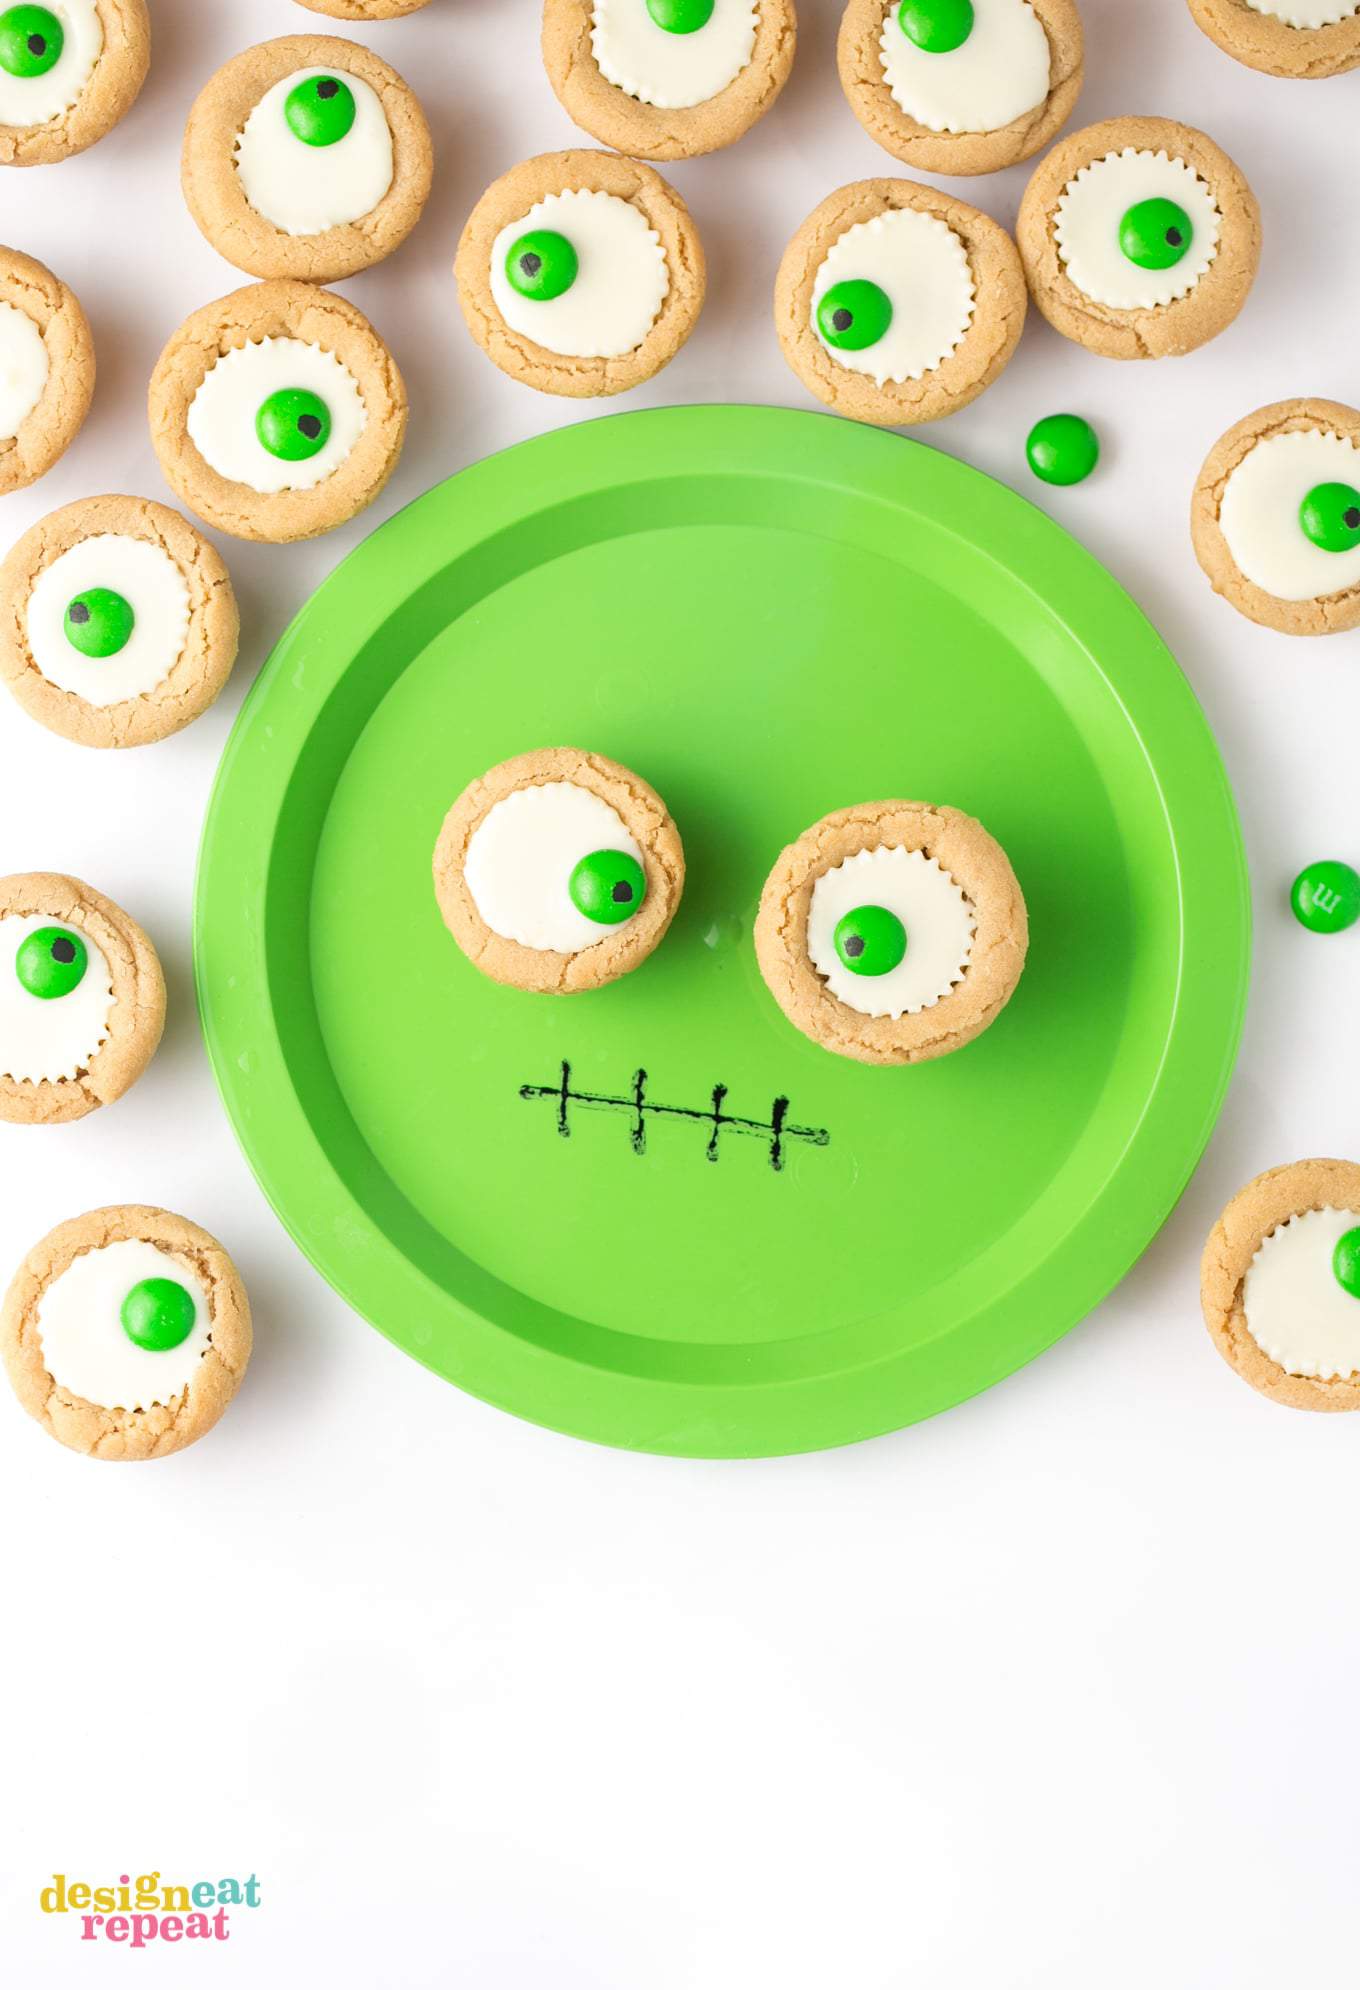 Mini white peanut butter cup cookies on green monster face plate.